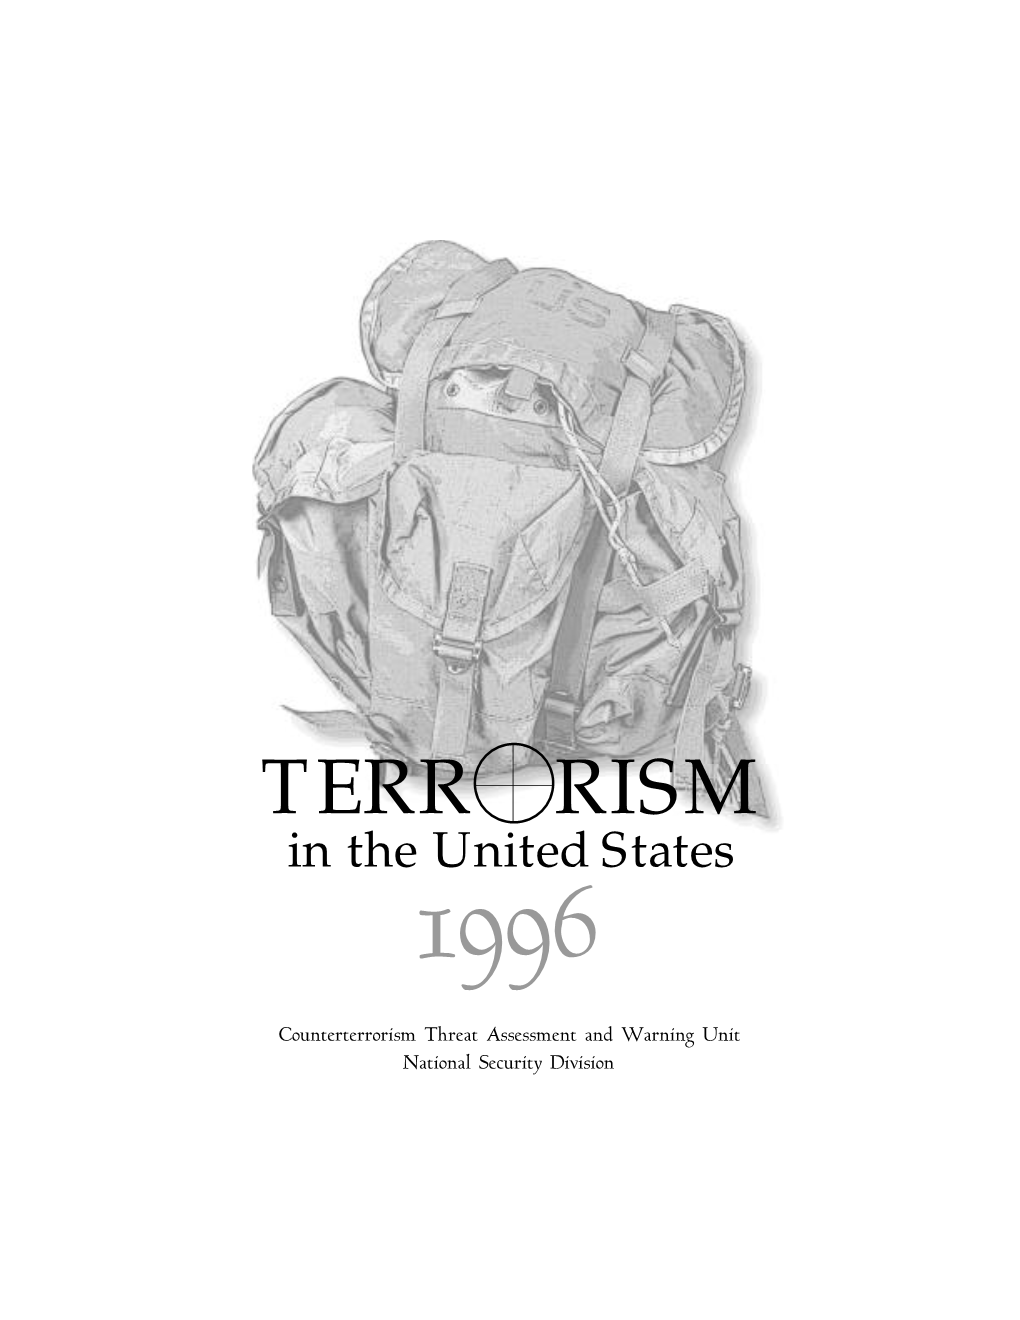 Terrorism in the United States 1996